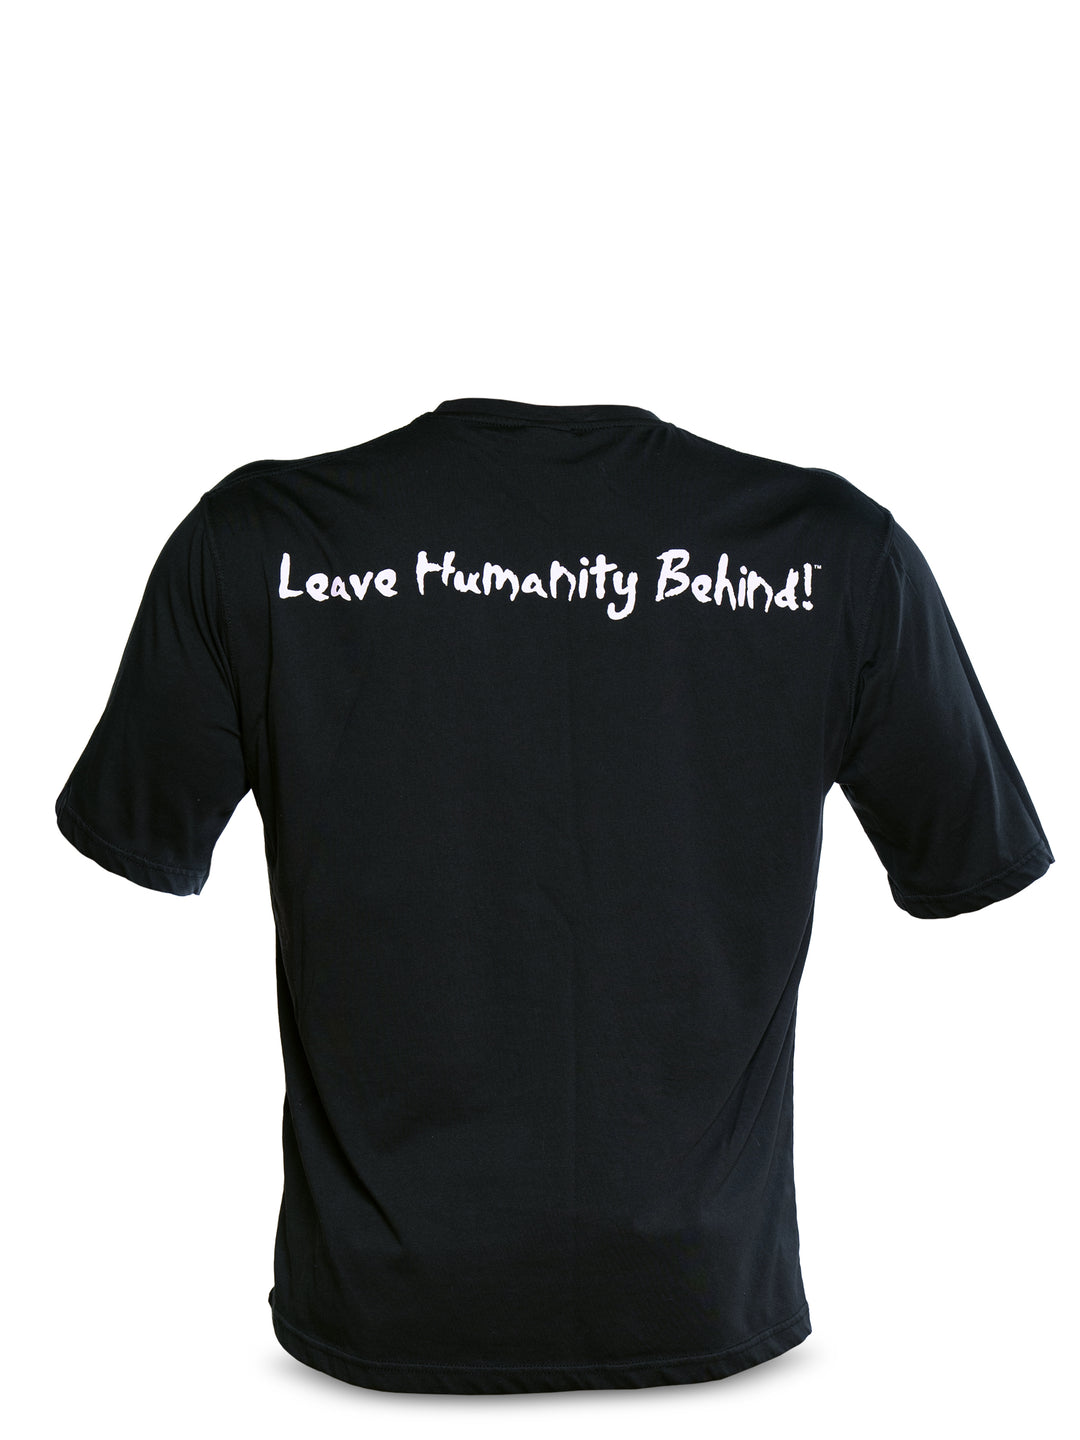 Back view of Black Free Standing Oversized Gym T-Shirt featuring Mutant's tagline 'Leave Humanity Behind' in white. White background.